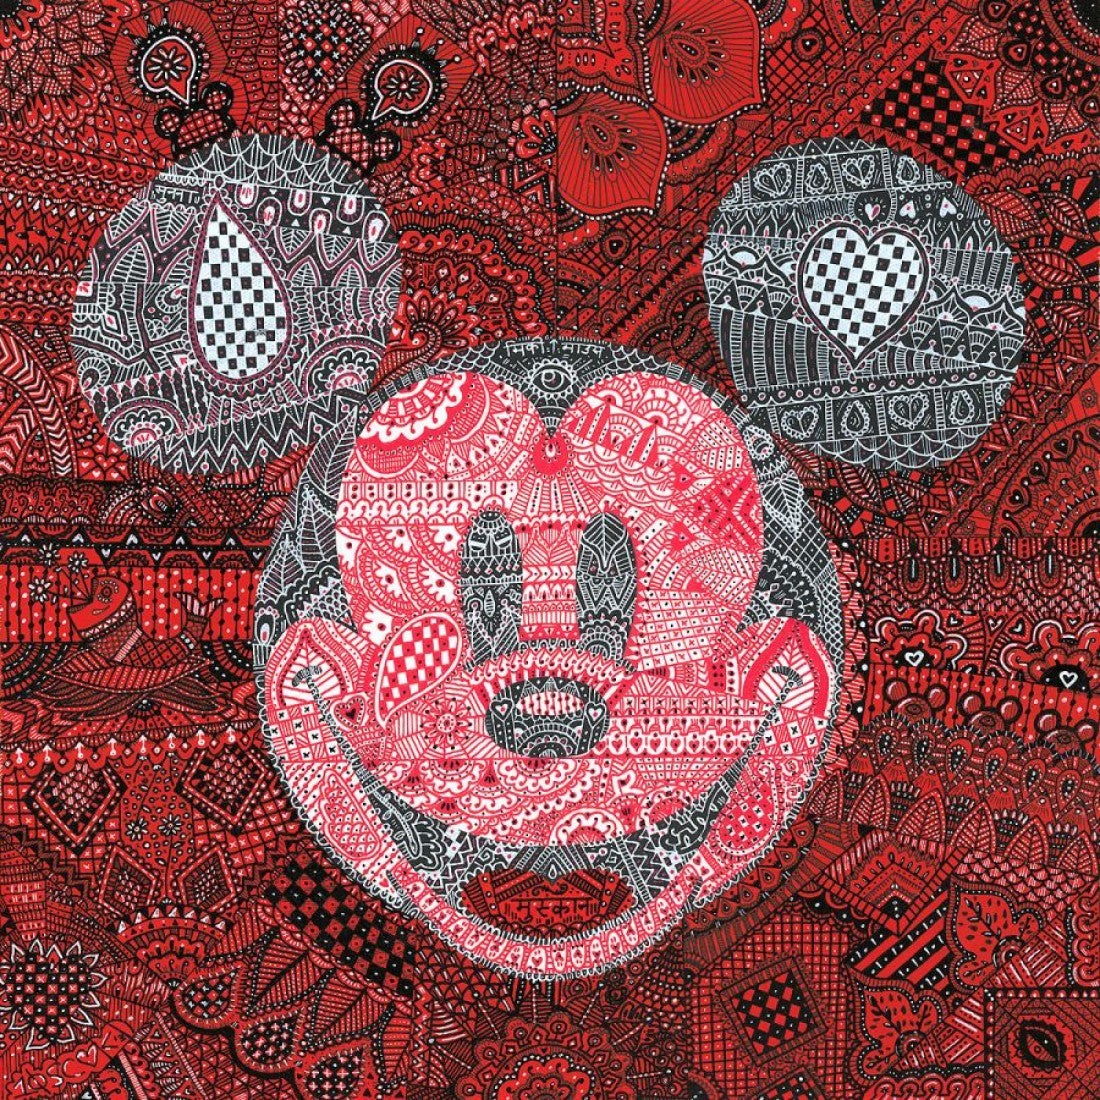 MeHandi Mickey by Tennessee Loveless inspired by Mickey Mouse